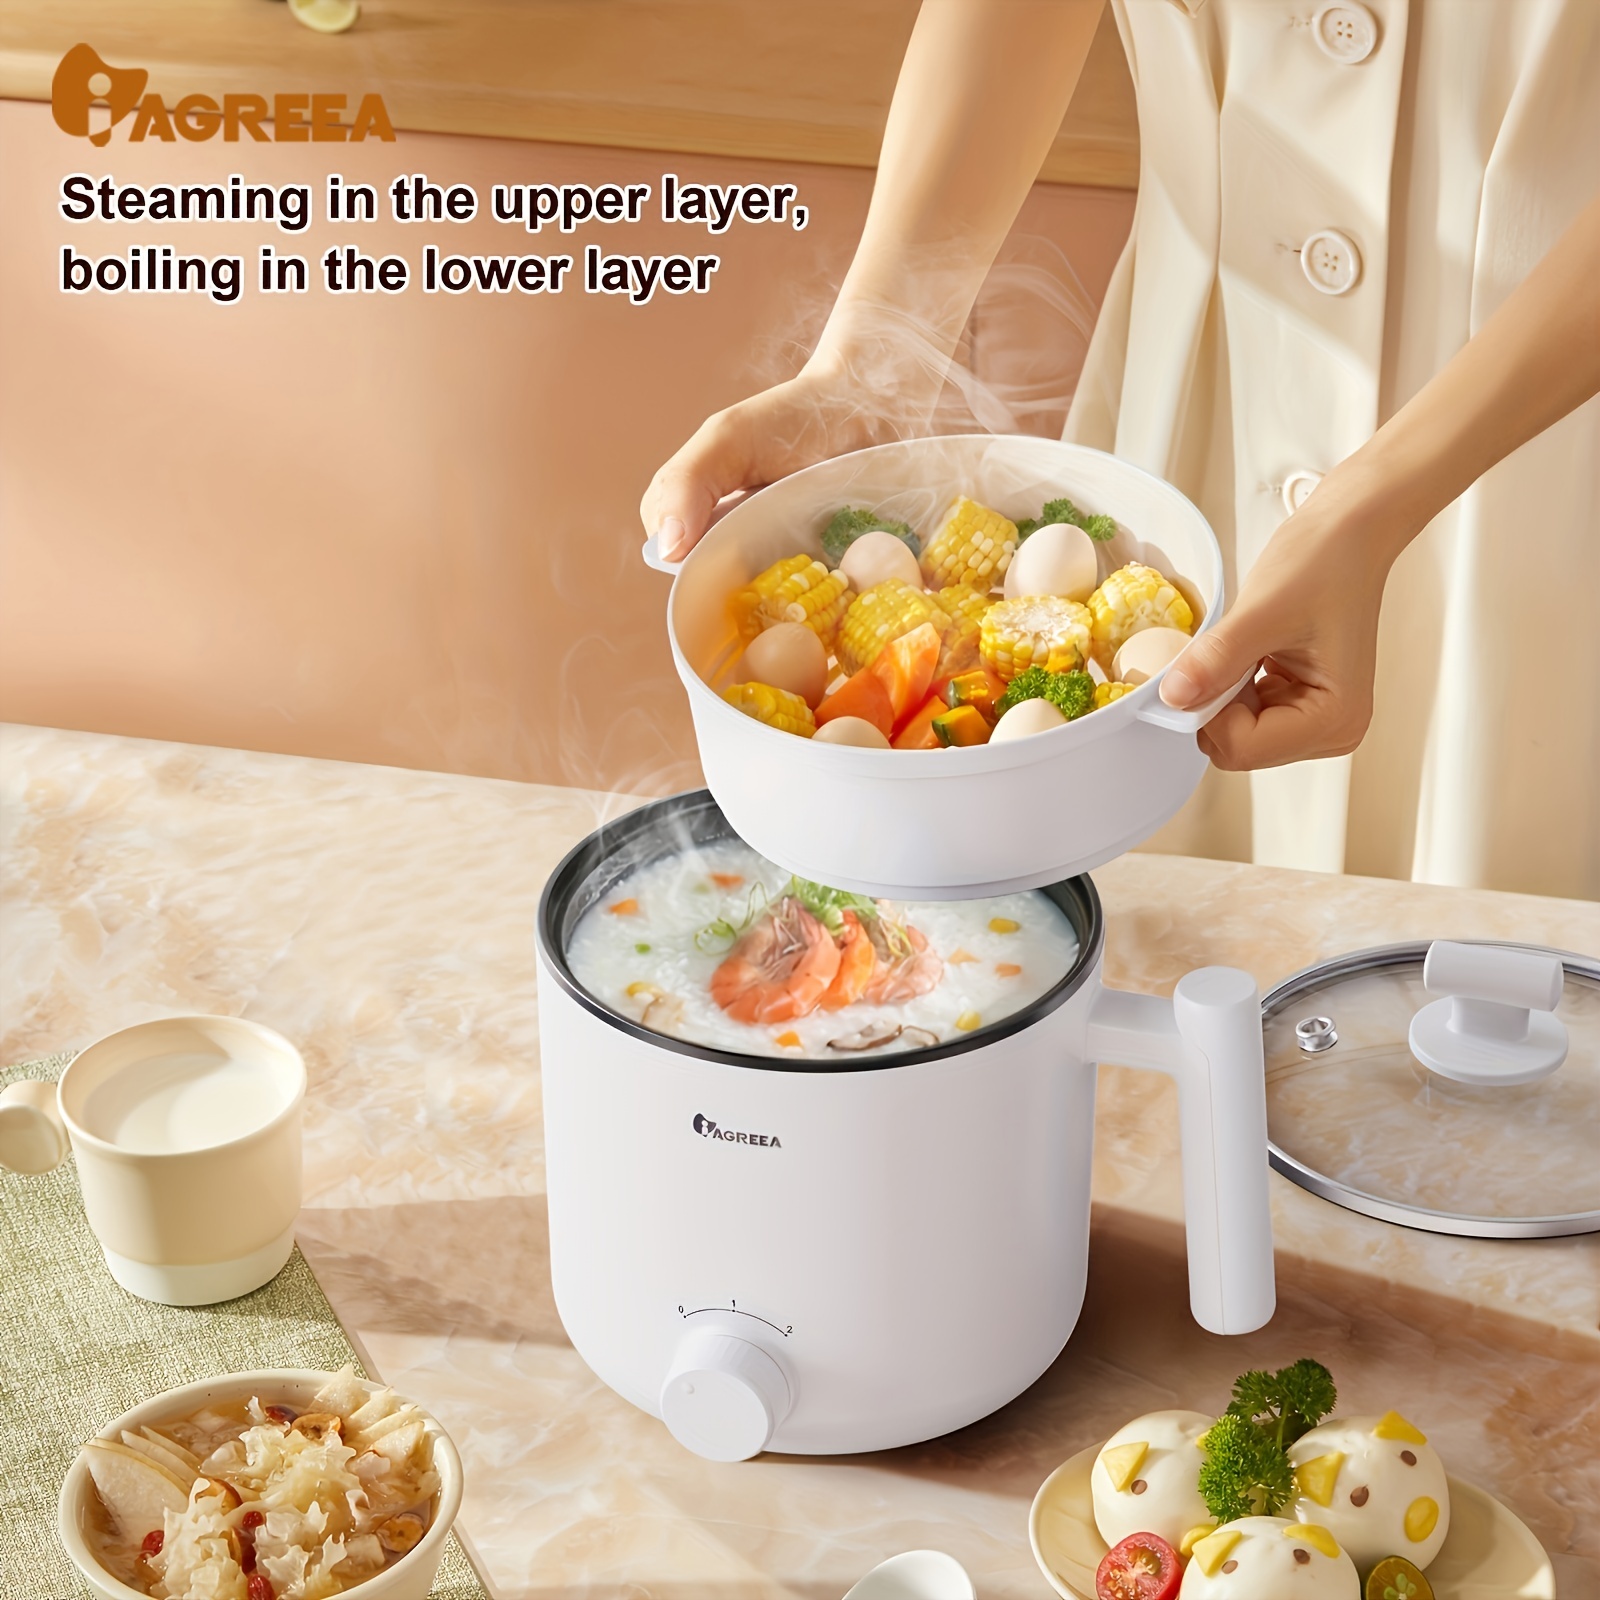  Rice Cooker, 1.8l Electric Rice Maker, Portable Rice Pot Cooker,  Mini Grain Cooker with Non Stick Pot, Multi Speed Rice Steaming Cooker,  Rice Cooker Steamer Basket for Grains, Oatmeal Stews and